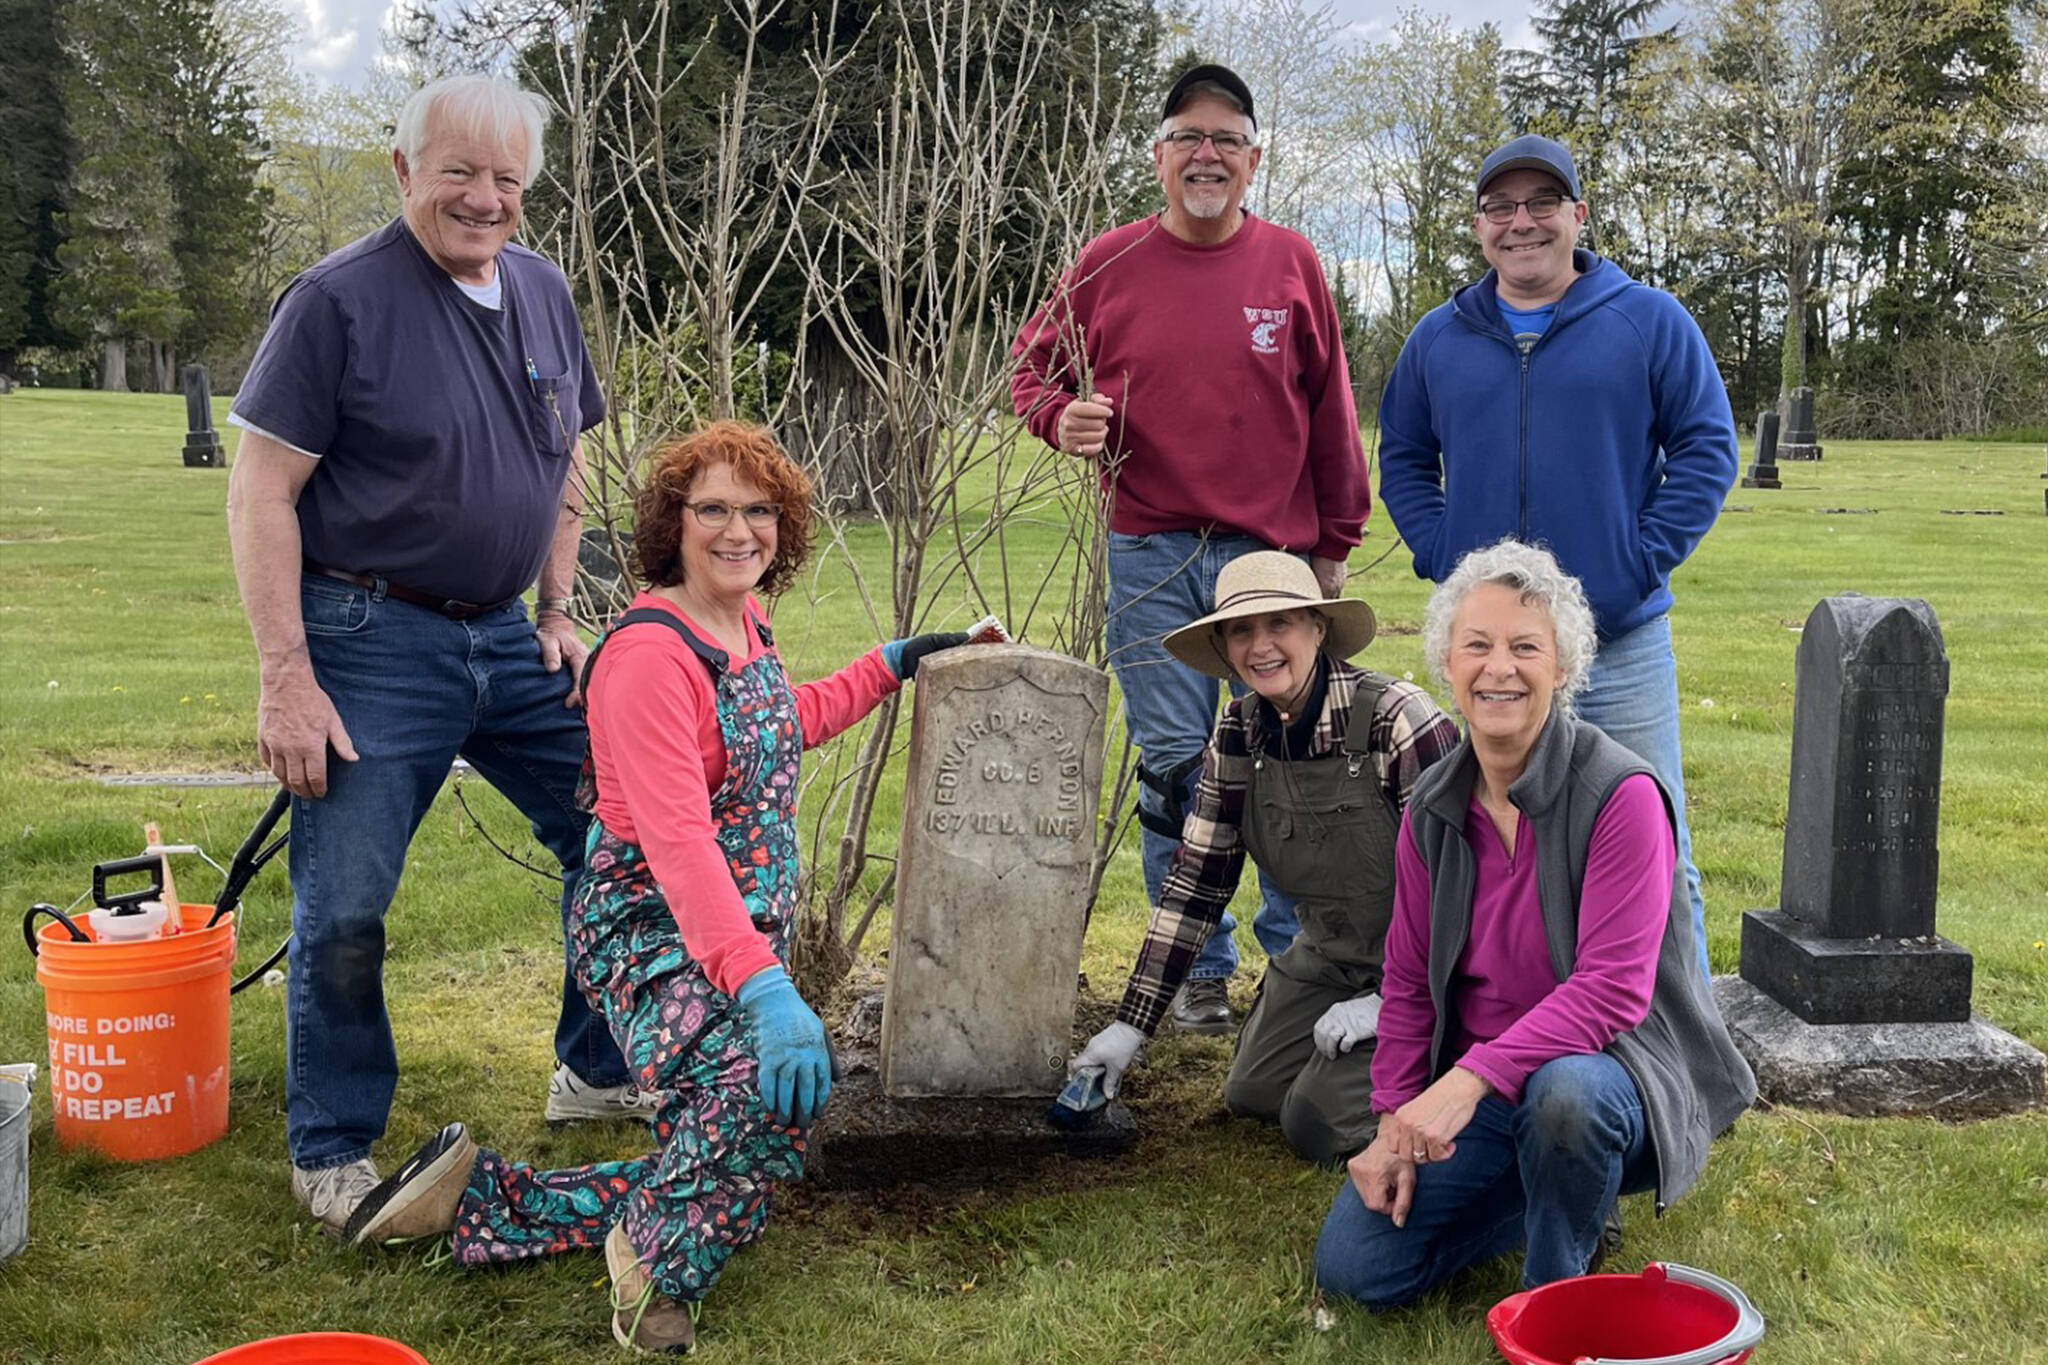 Volunteers clean a headstone at the Fall City Cemetery. From left: (standing) Gene Stevens, Rick Divers, Richard Heilser; (kneeling) Anne Neilson, Donna Driver-Kummen, Cindy Parks. (Photo courtesy of Cindy Parks.)